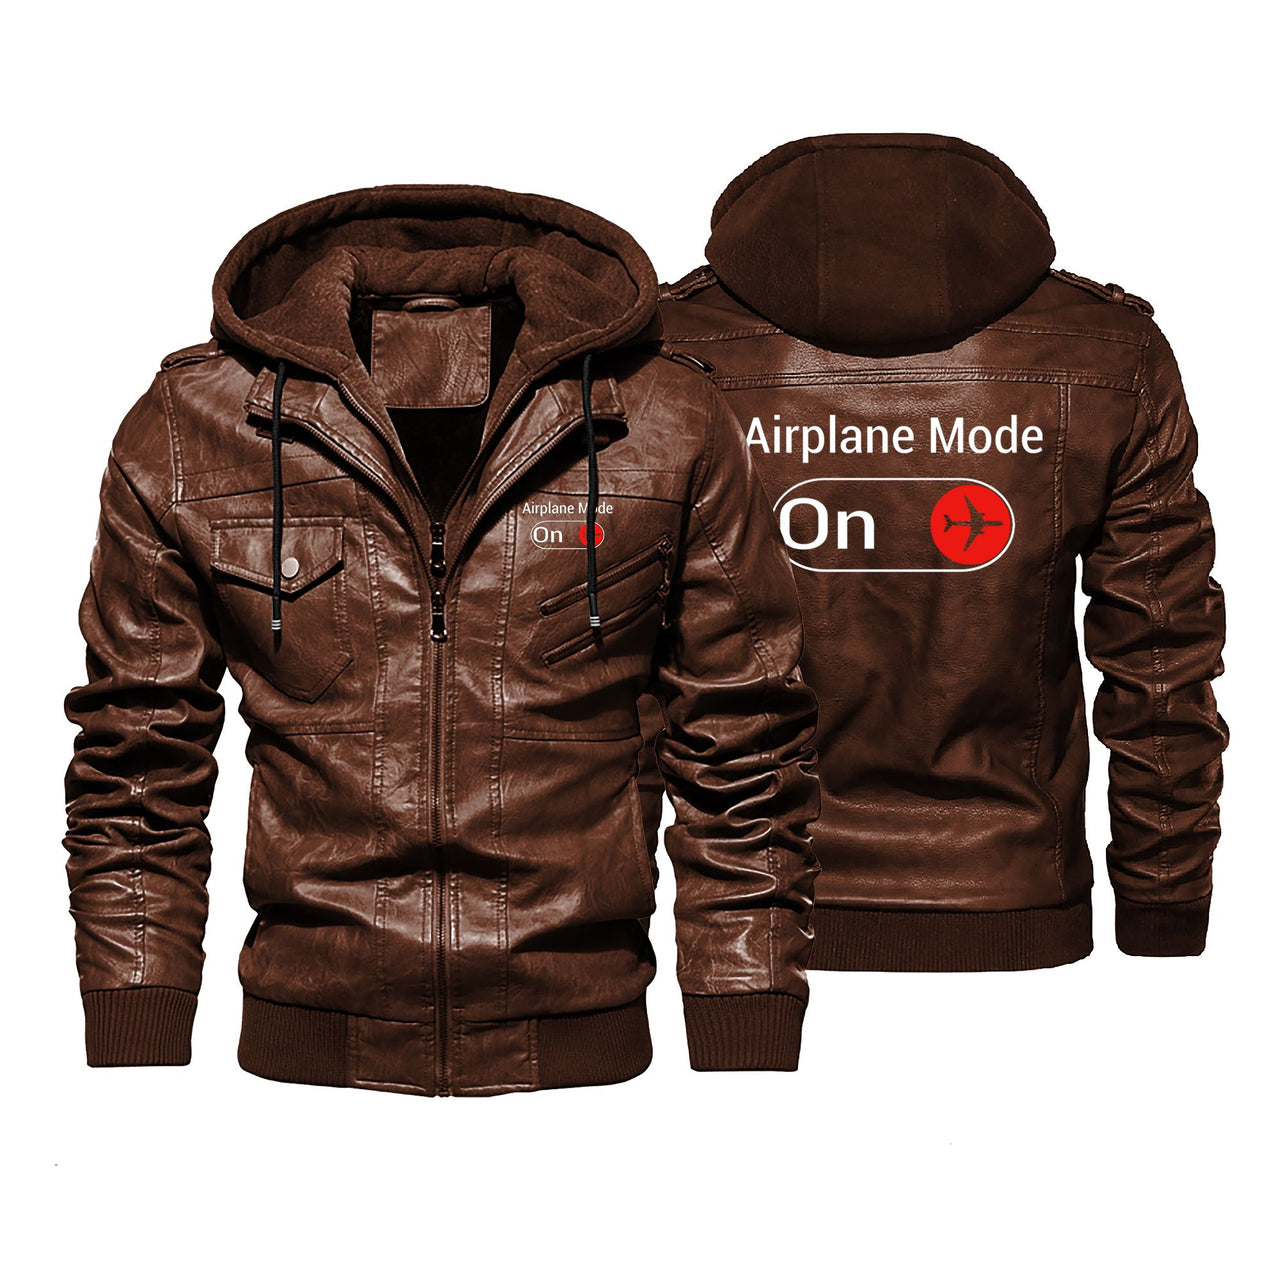 Airplane Mode On Designed Hooded Leather Jackets